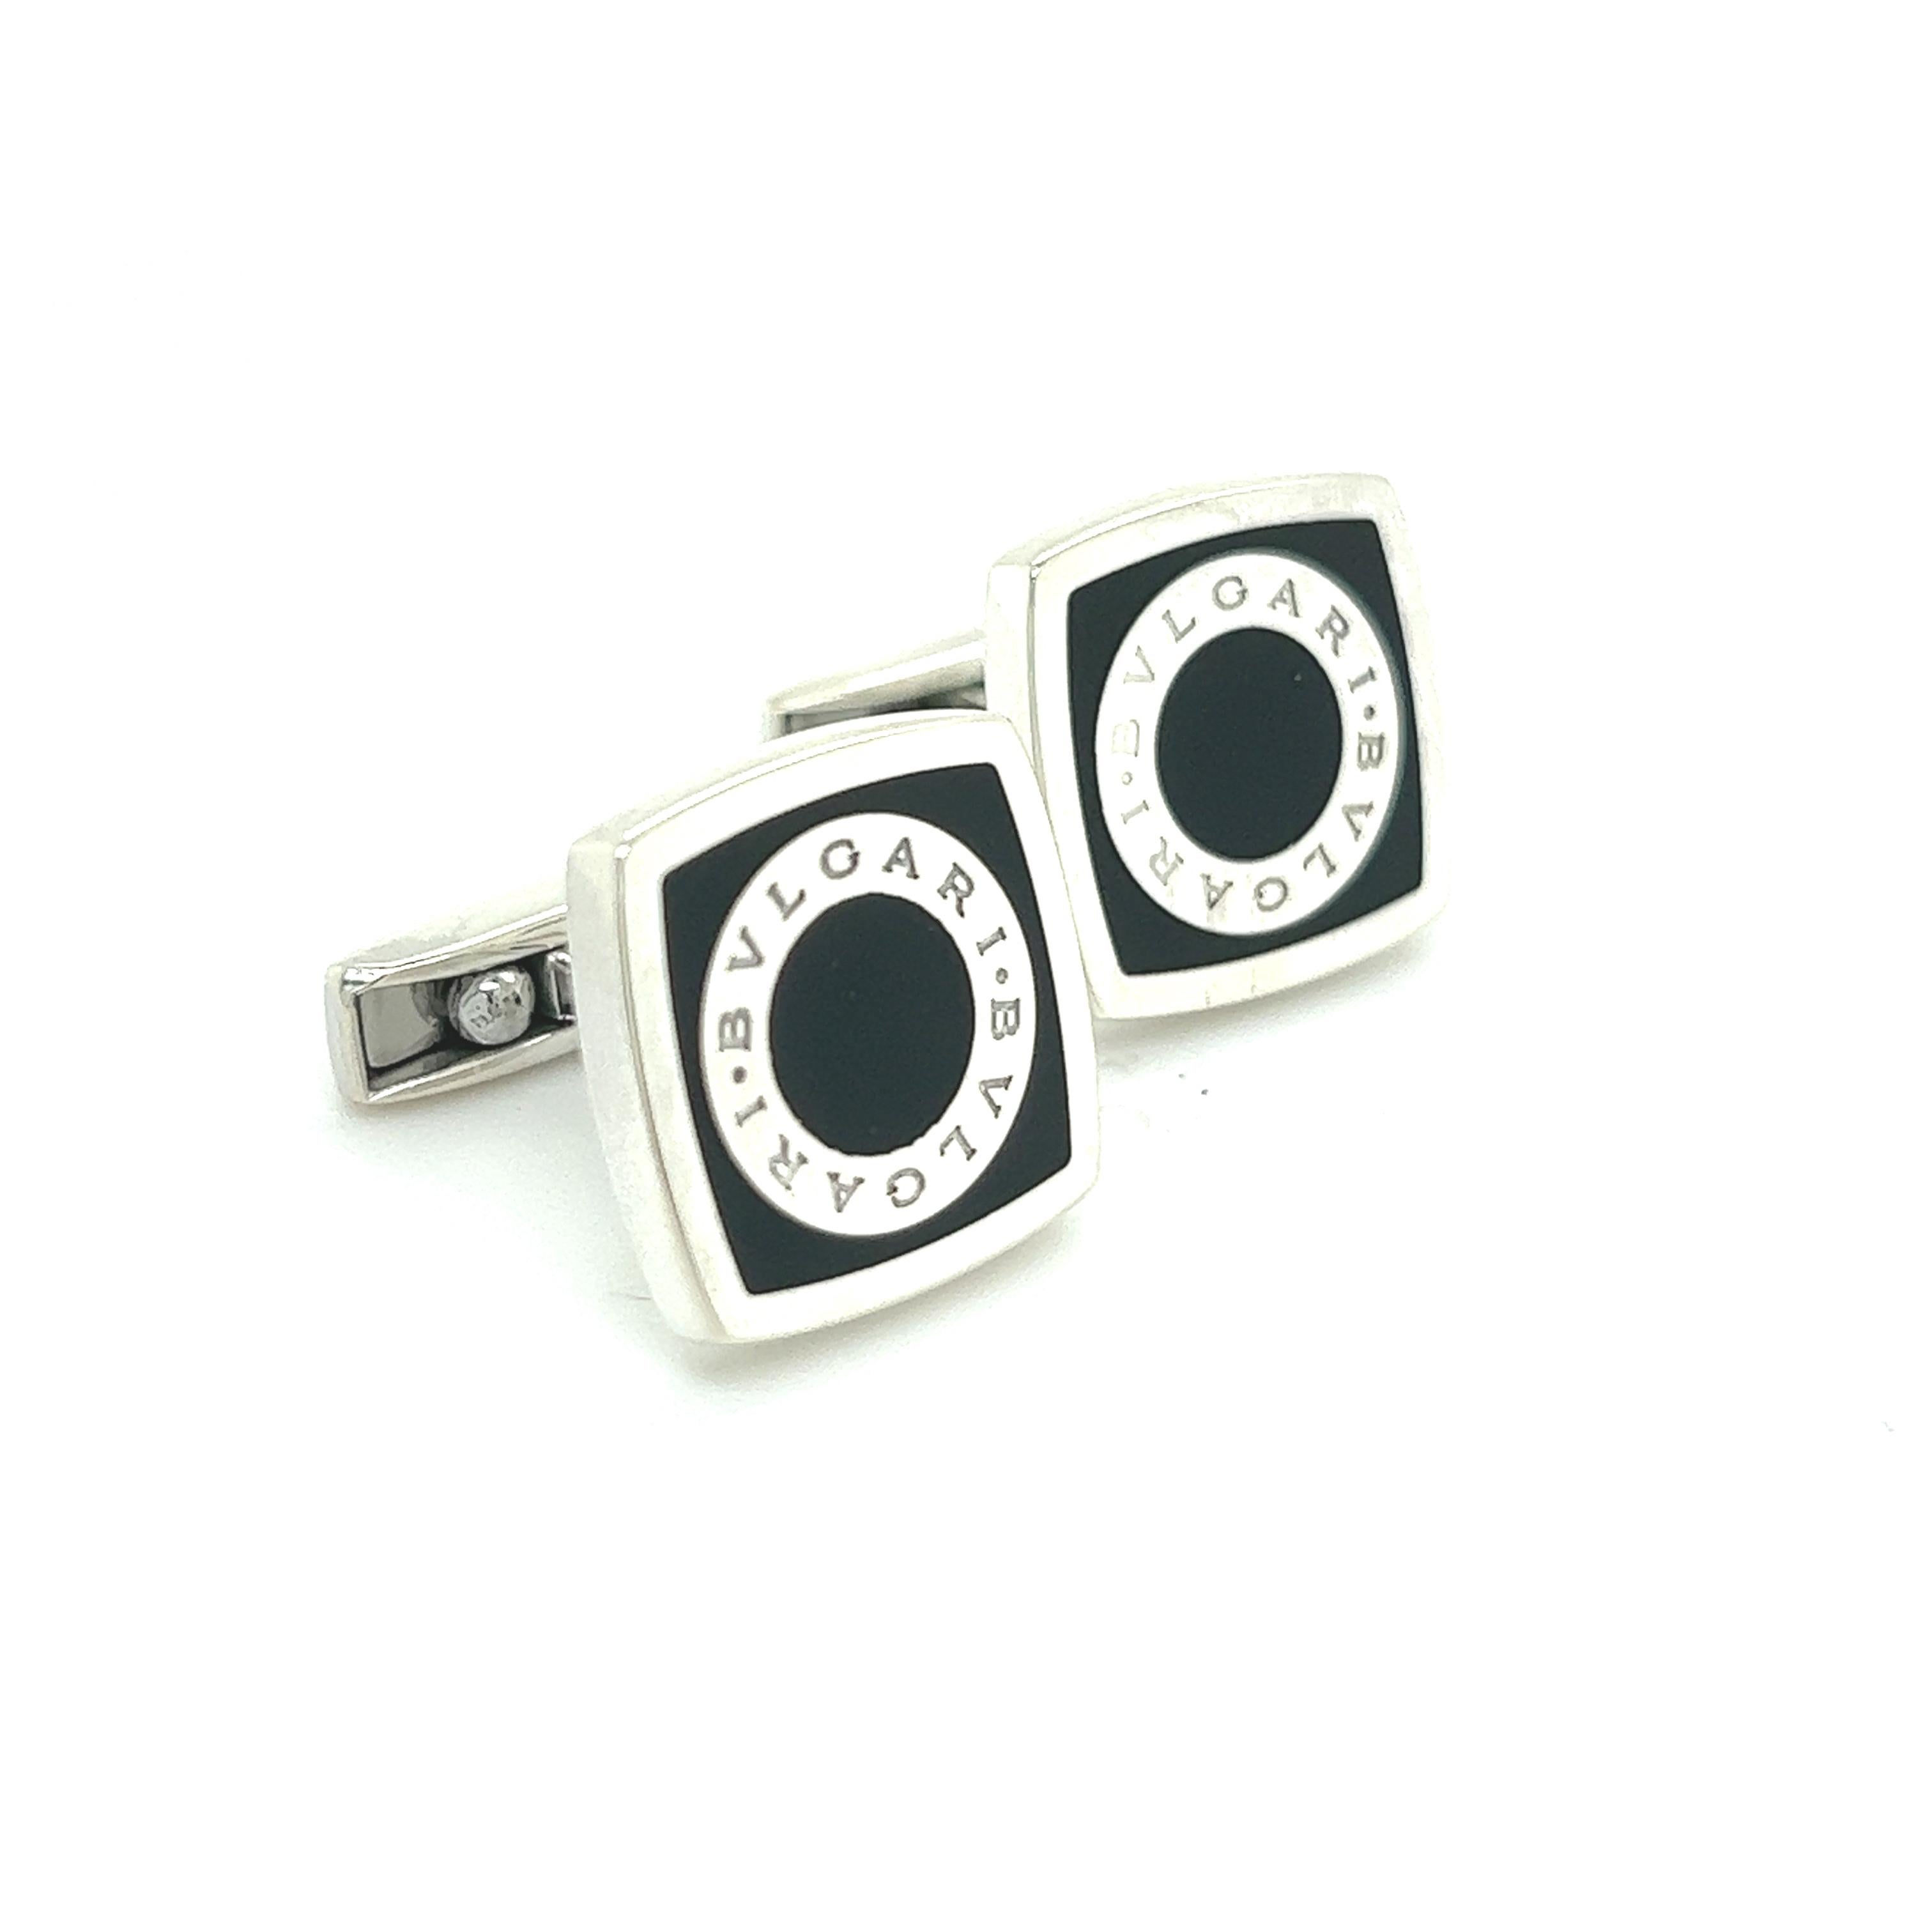 Bulgari Bvlgari Estate Onyx Cufflinks Silver B7

TRUSTED SELLER SINCE 2002

PLEASE SEE OUR HUNDREDS OF POSITIVE FEEDBACKS FROM OUR CLIENTS!!

FREE SHIPPING

DETAILS
Material: Onyx and Sterling Silver
Weight: 18 Grams

These Authentic Bulgari Men's